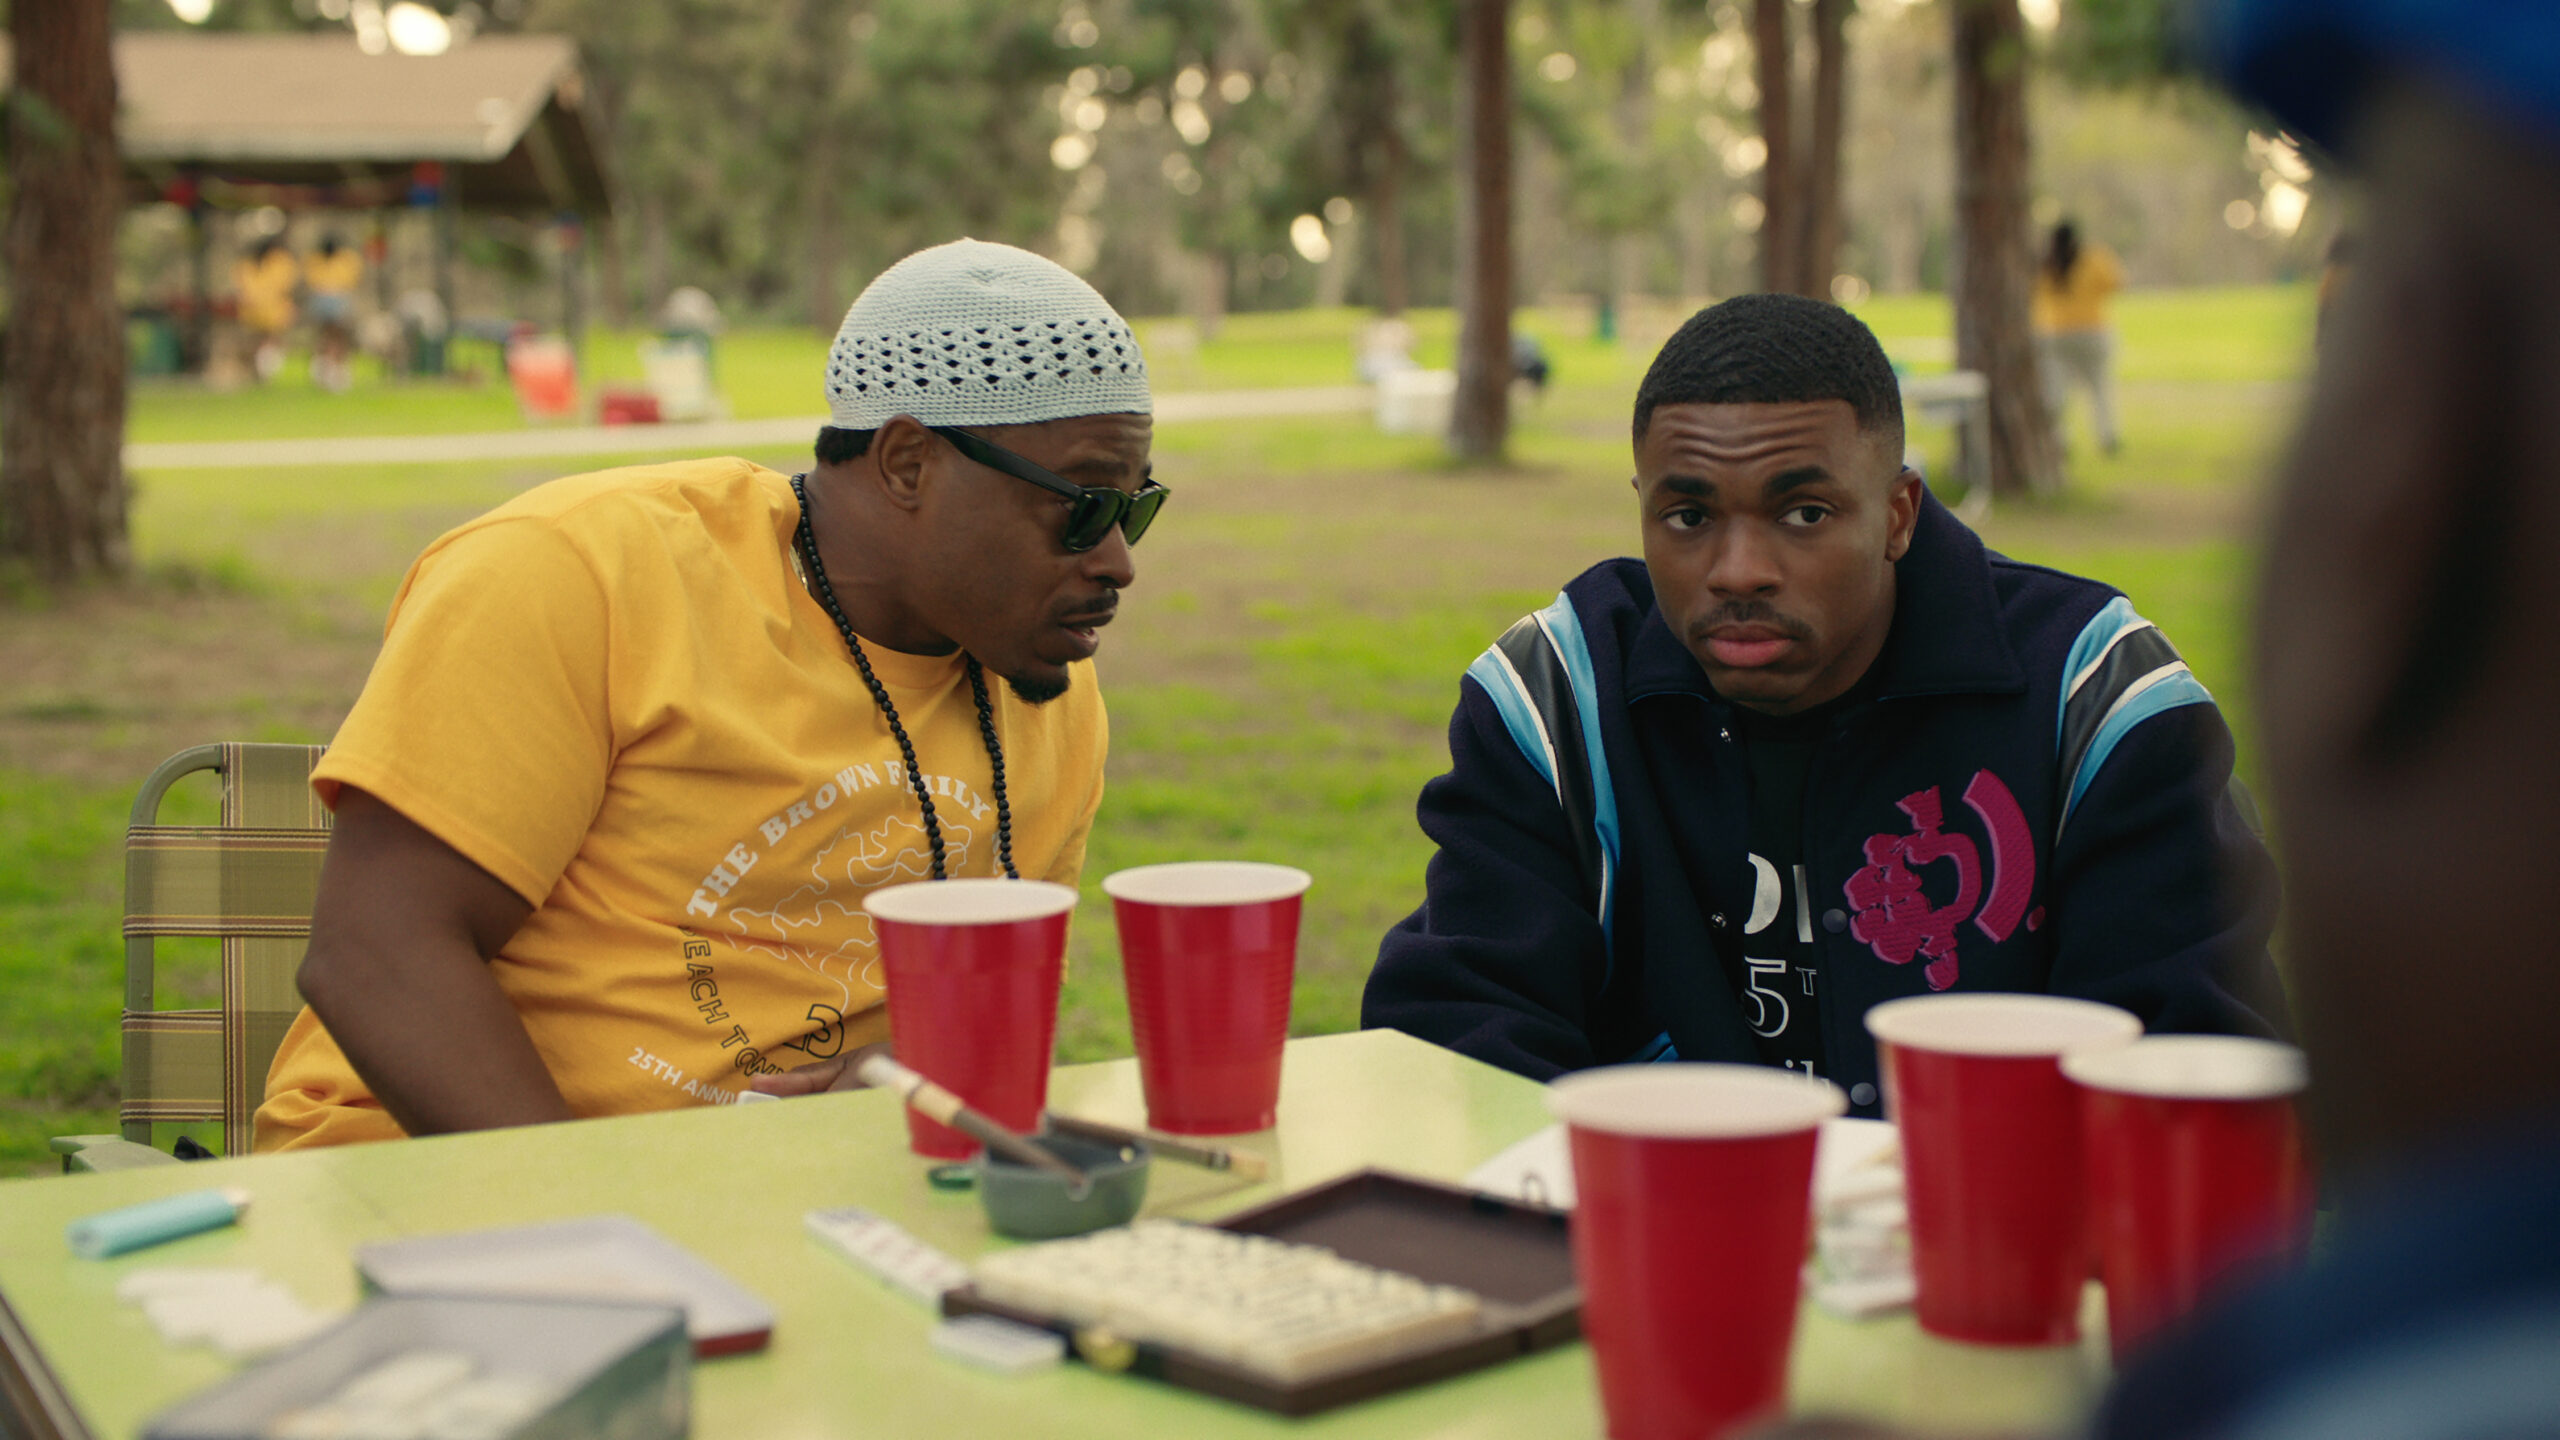 Kareem Grimes and Vince Staples in Vince Staples, Ian Edelman, and Maurice Williams' Netflix comedy drama television series, The Vince Staples Show Season 1 Episode 3